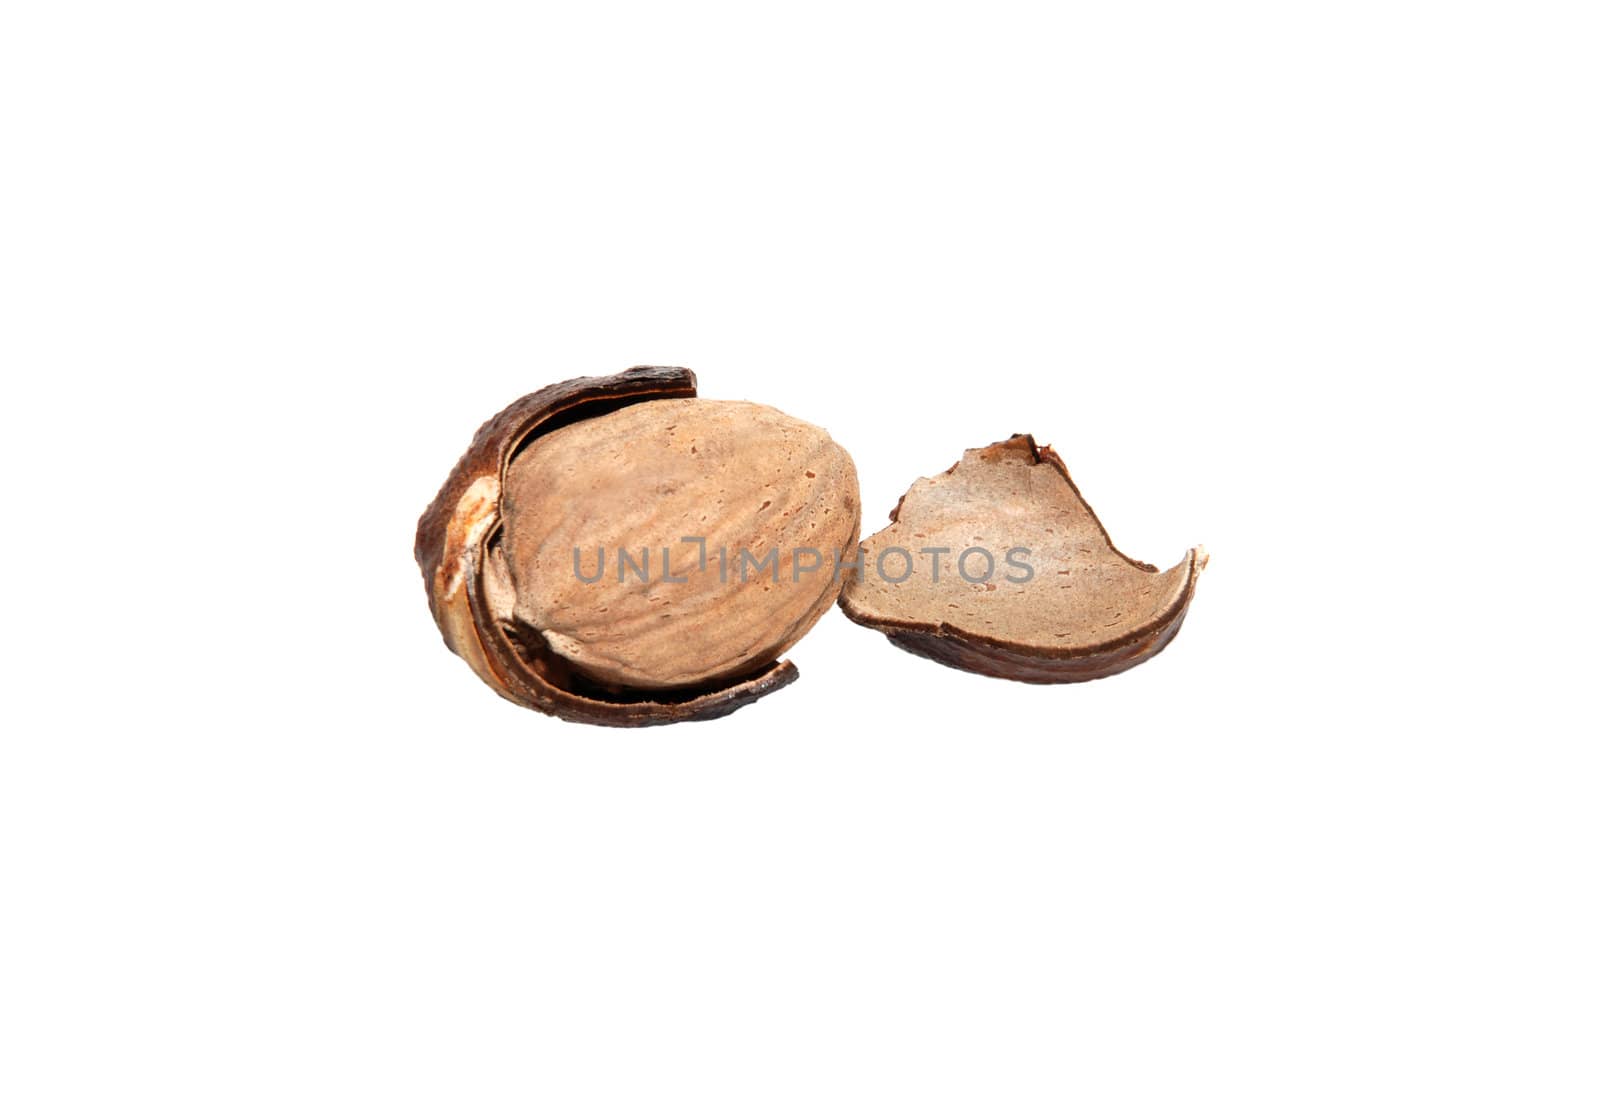 Whole nutmeg broken open, isolated on a white background